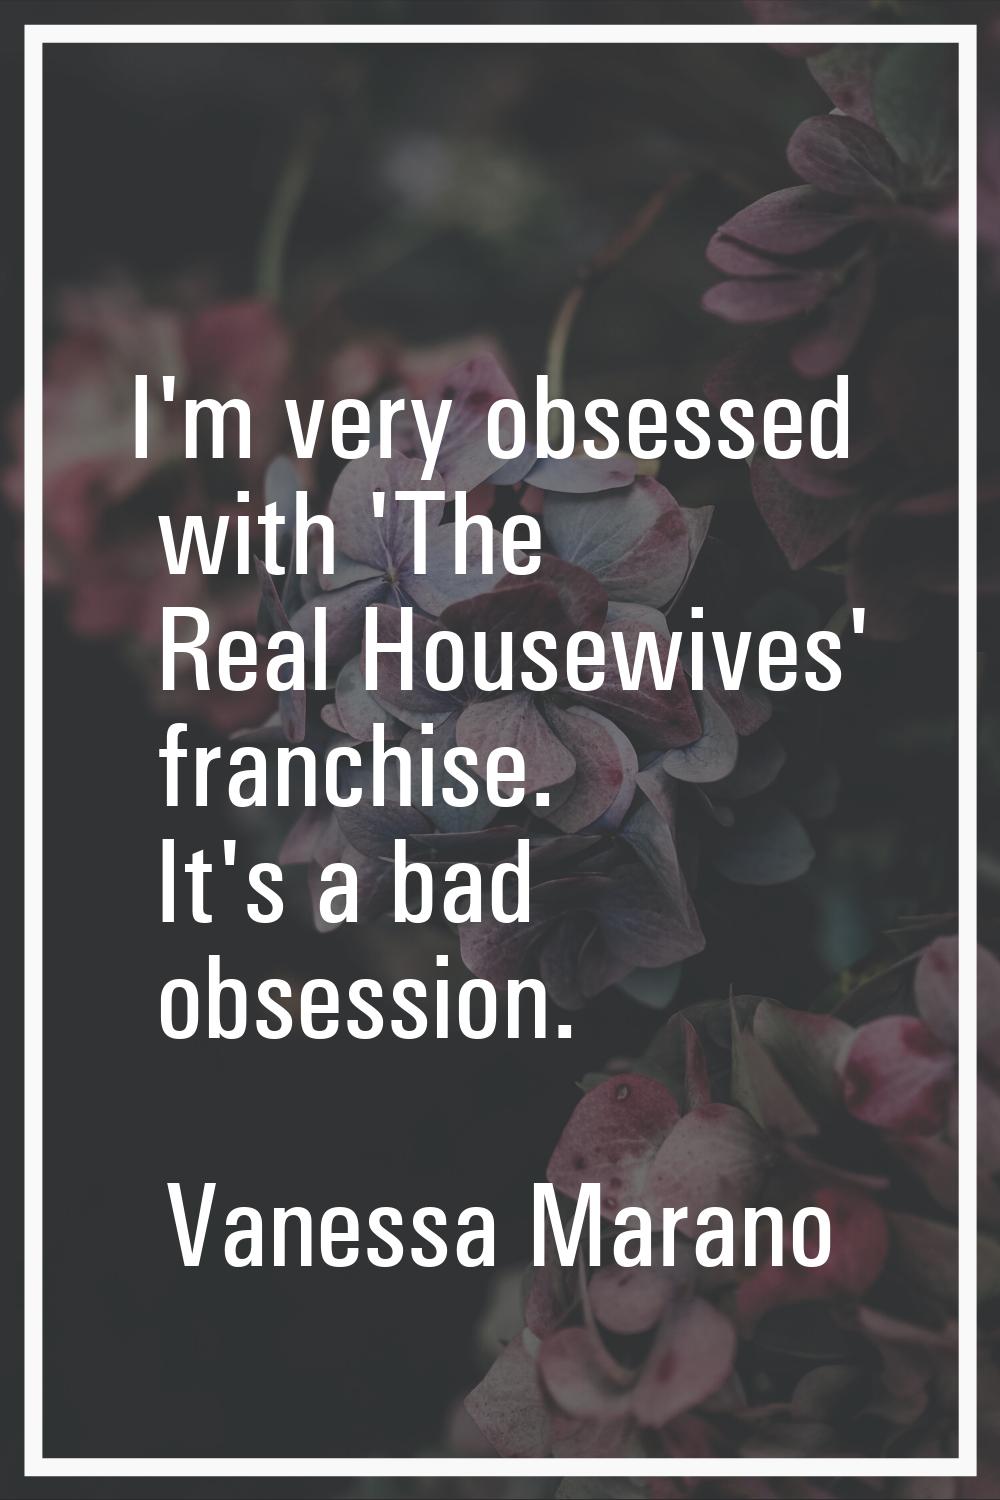 I'm very obsessed with 'The Real Housewives' franchise. It's a bad obsession.